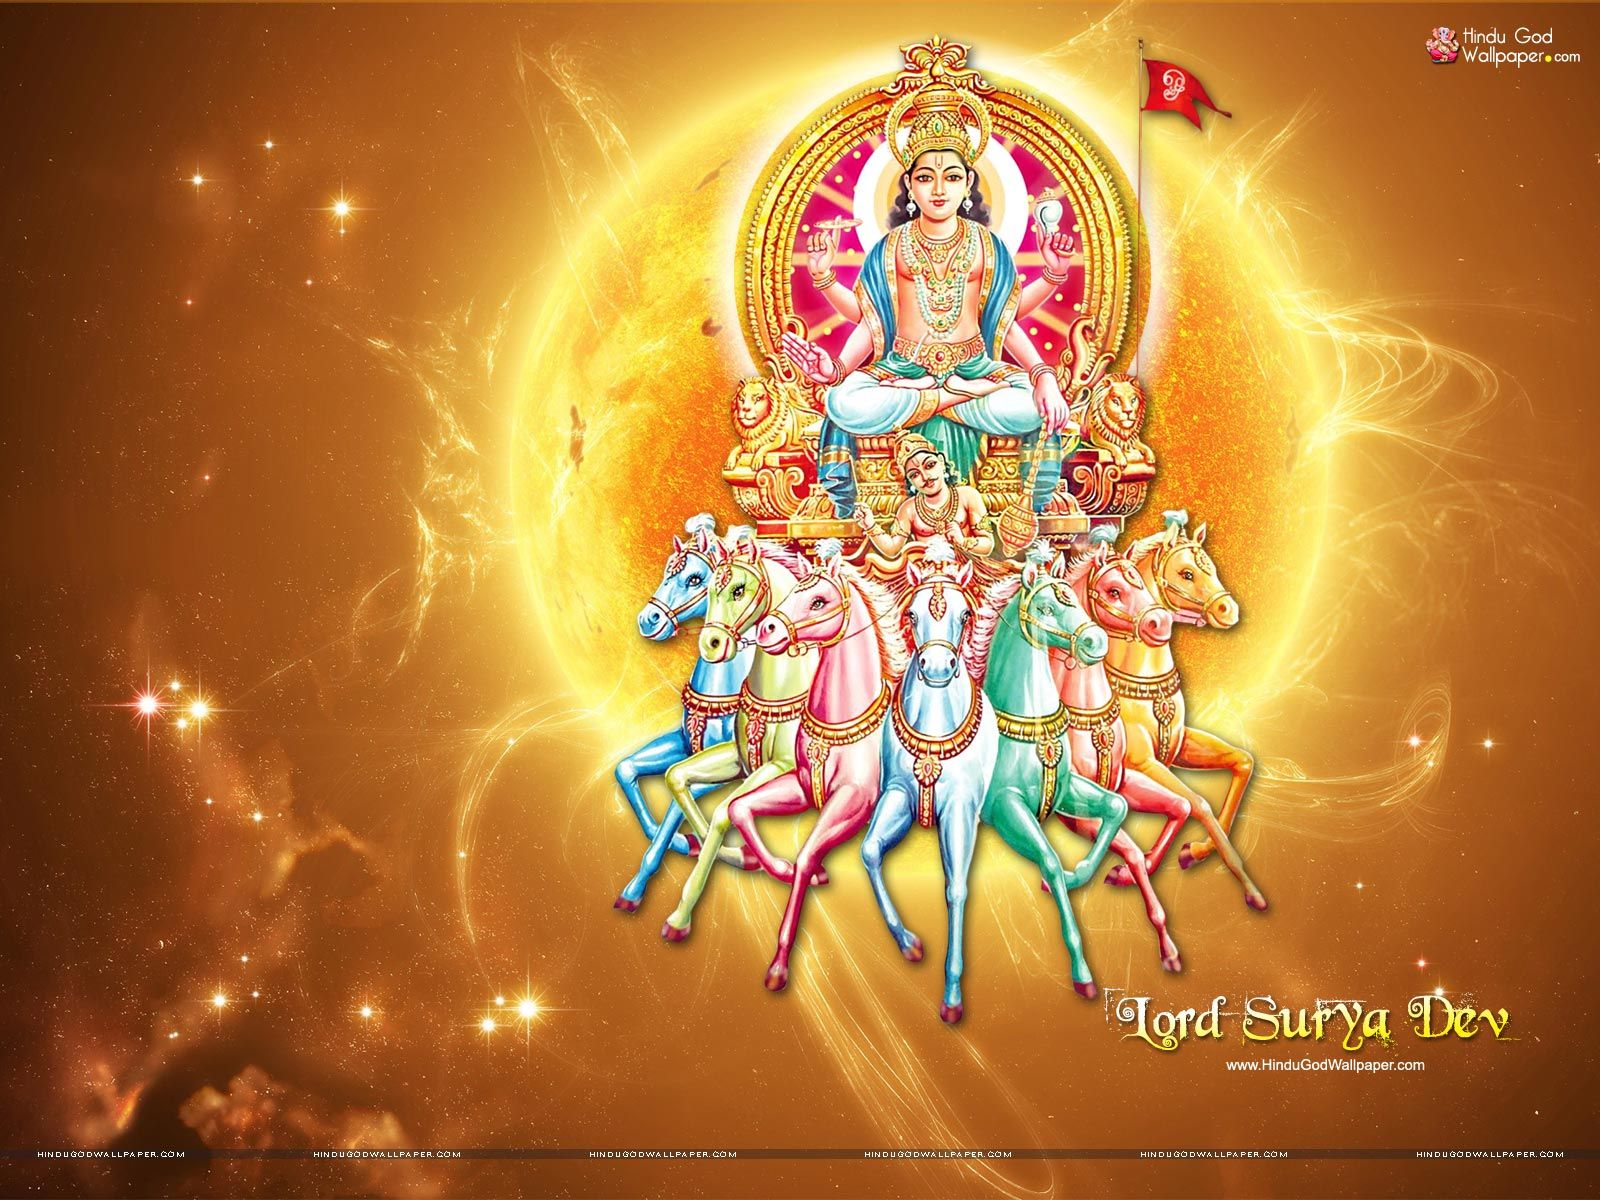 Lord Surya Dev Wallpaper For Desktop With